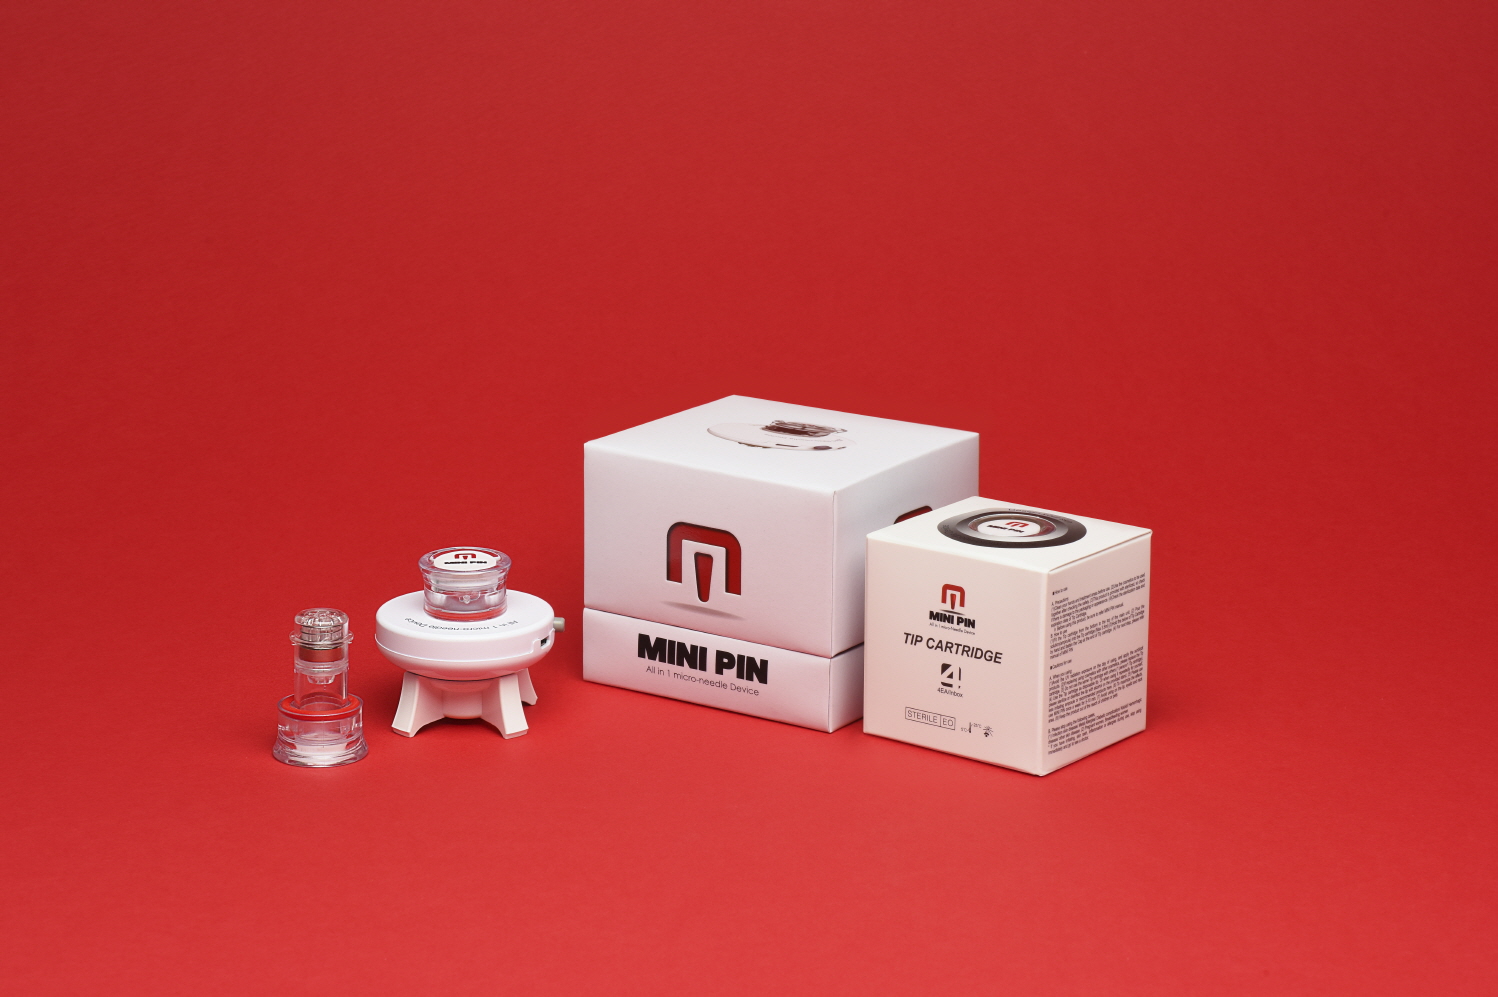 MINIPIN; Home Beauty Device for anti-aging from Microneedles